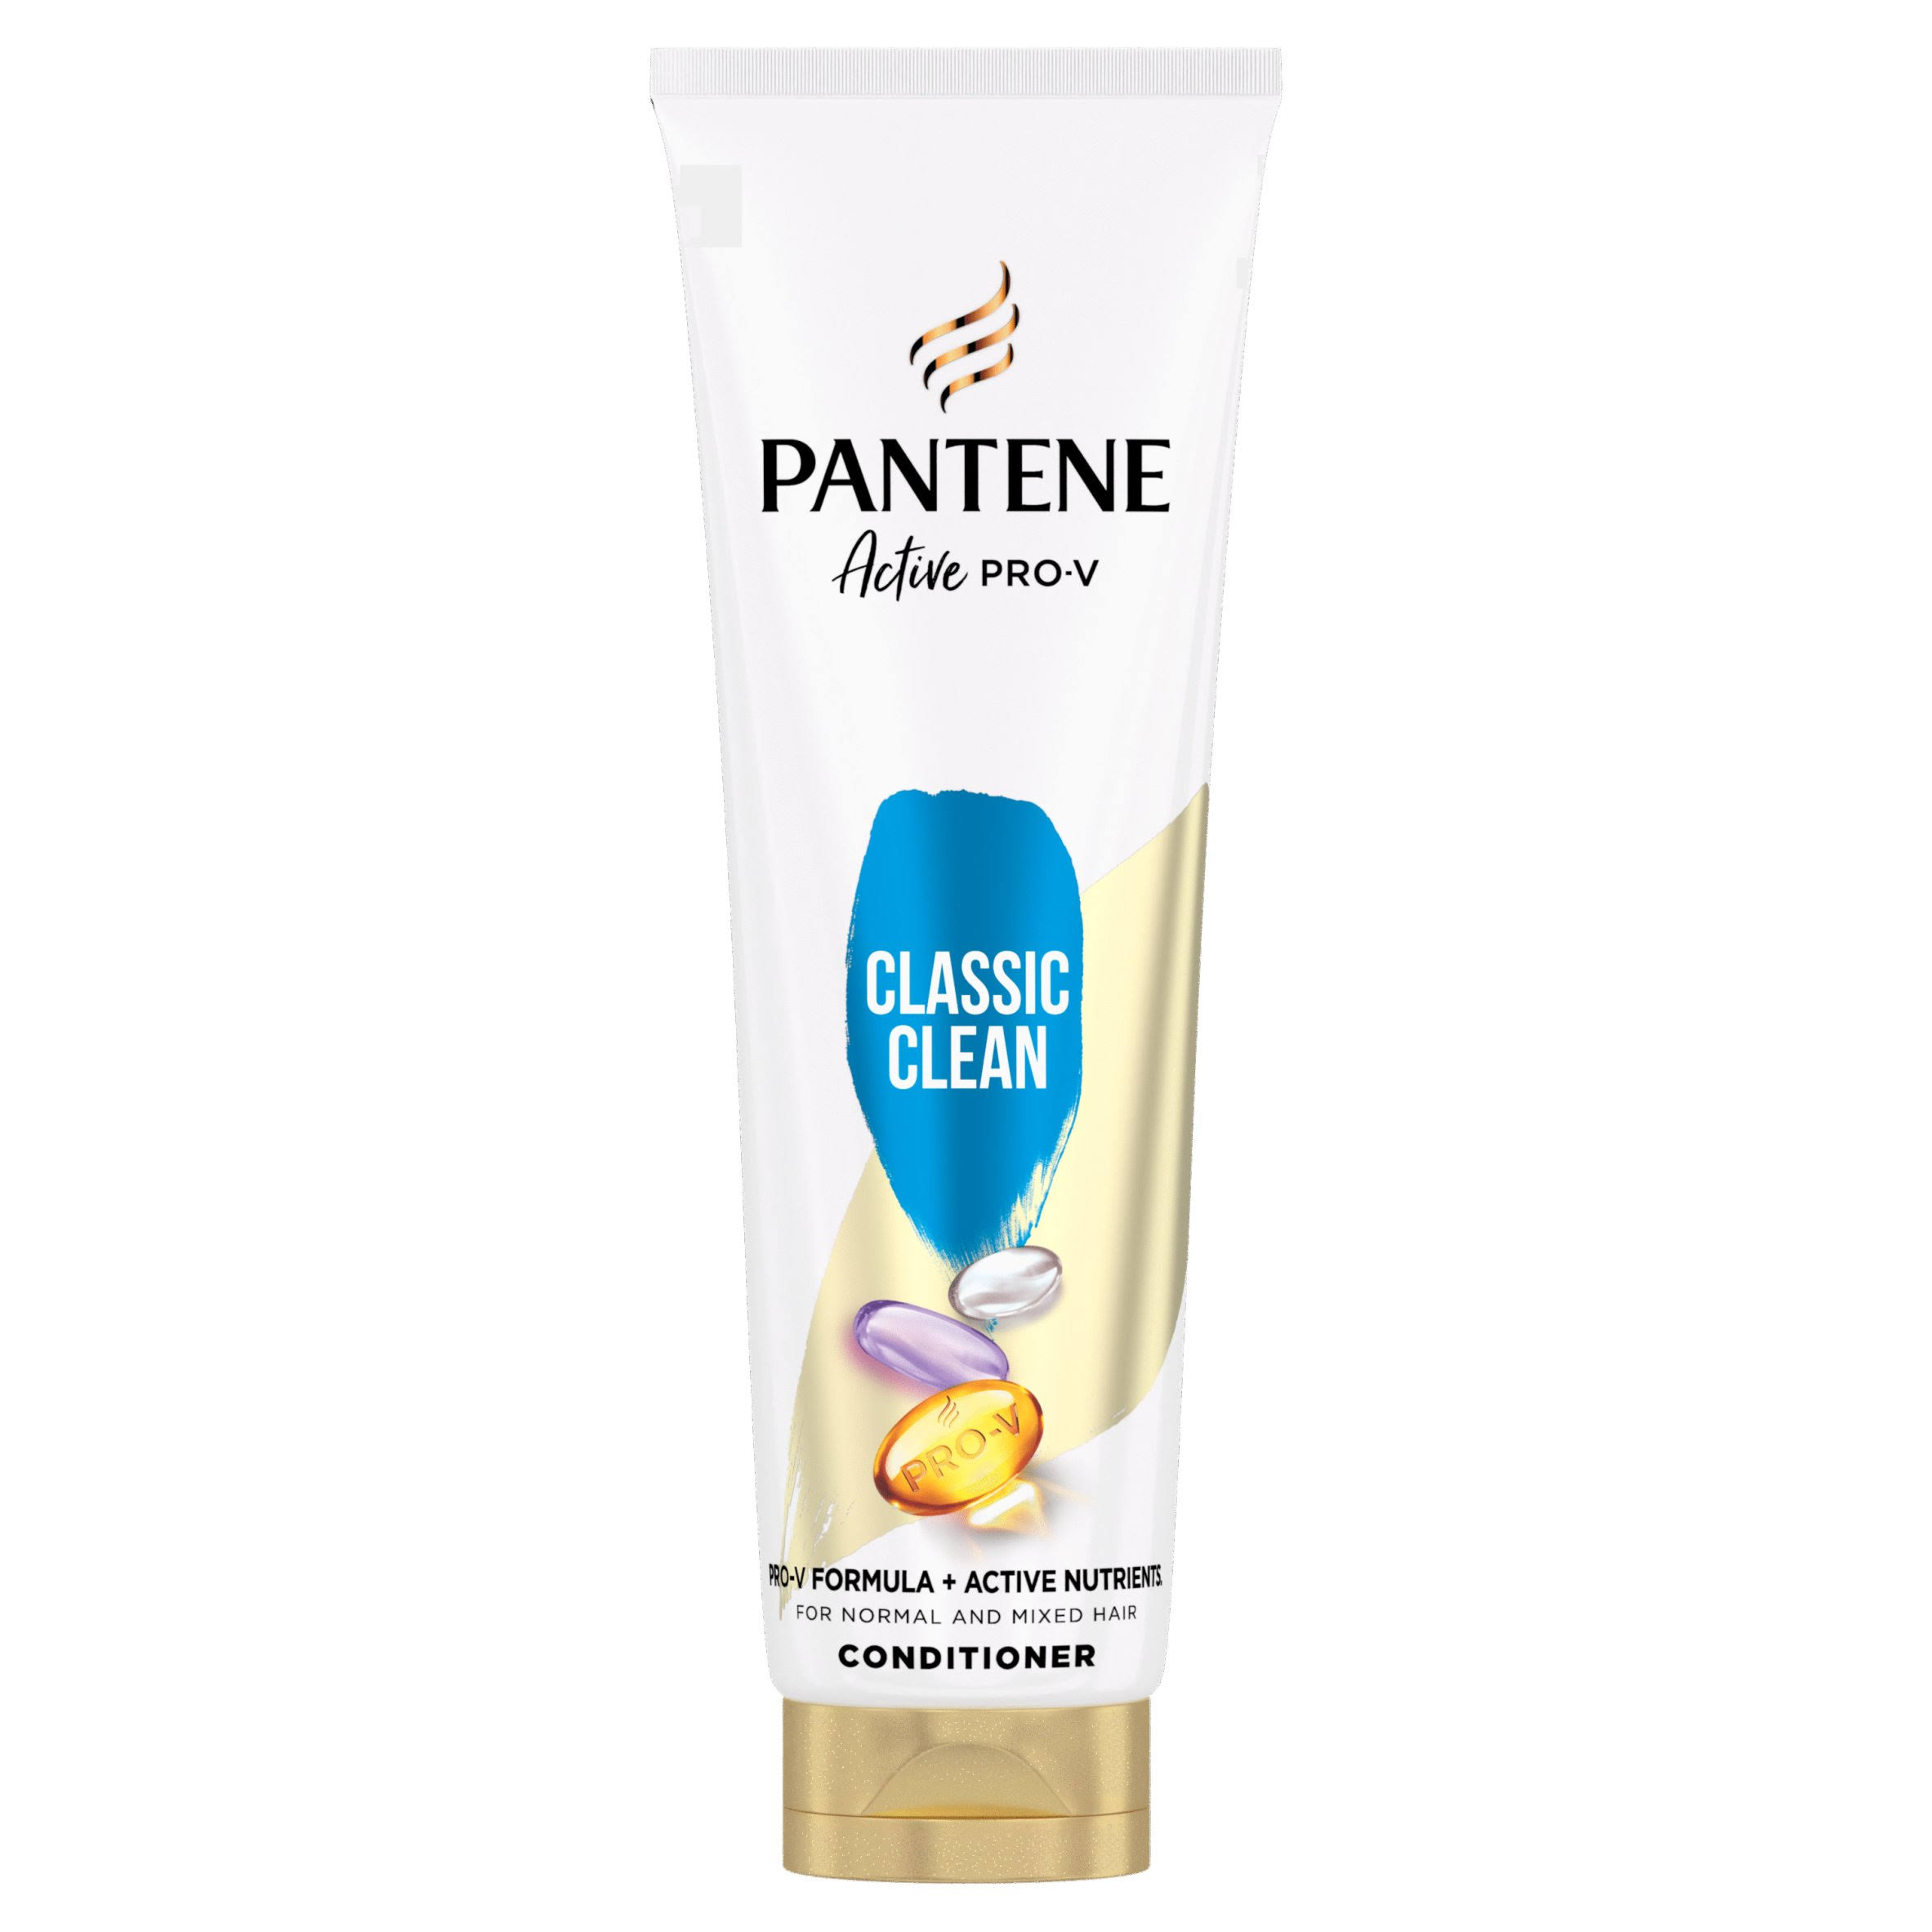 Pantene Conditioner Classic Clean 250ml by dpharmacy